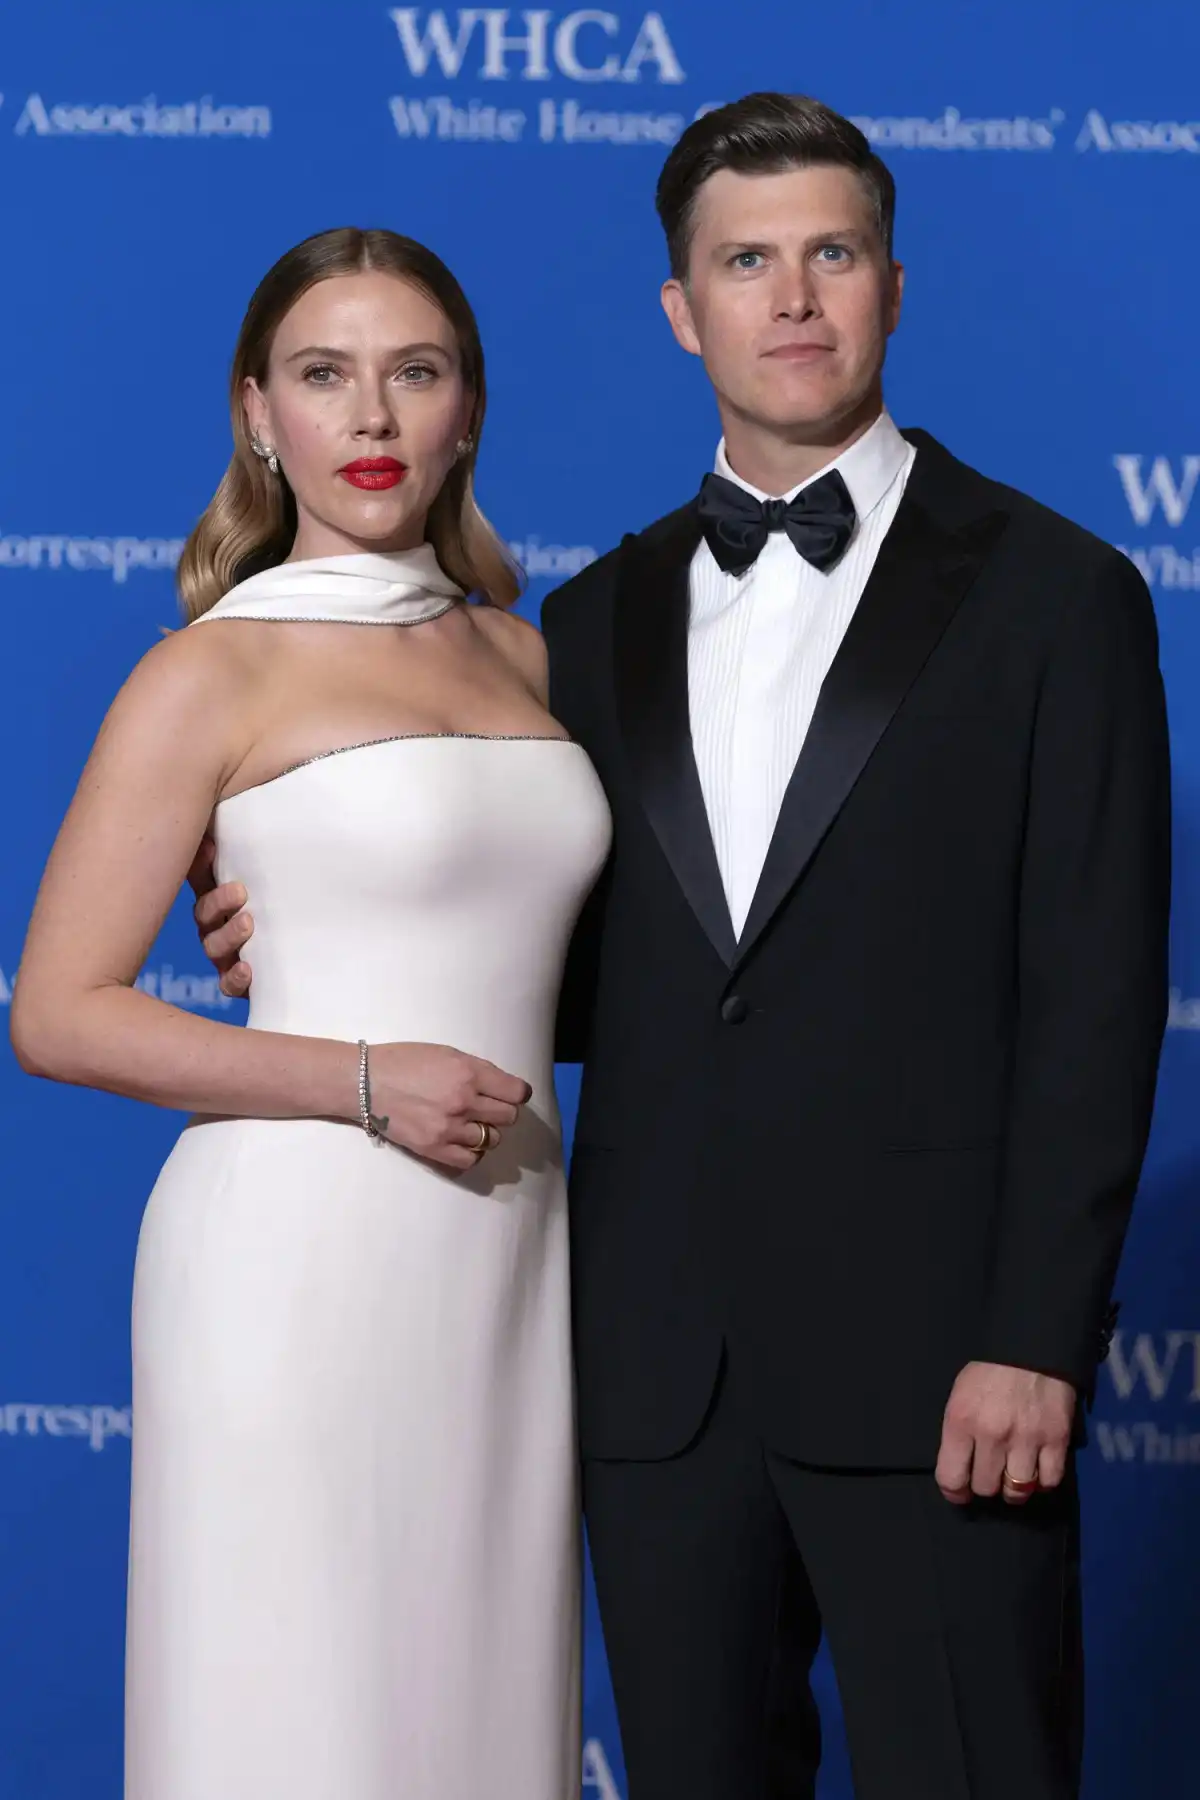 Colin Jost jokes about relationship with Scarlett Johansson at White House Correspondents' Dinner